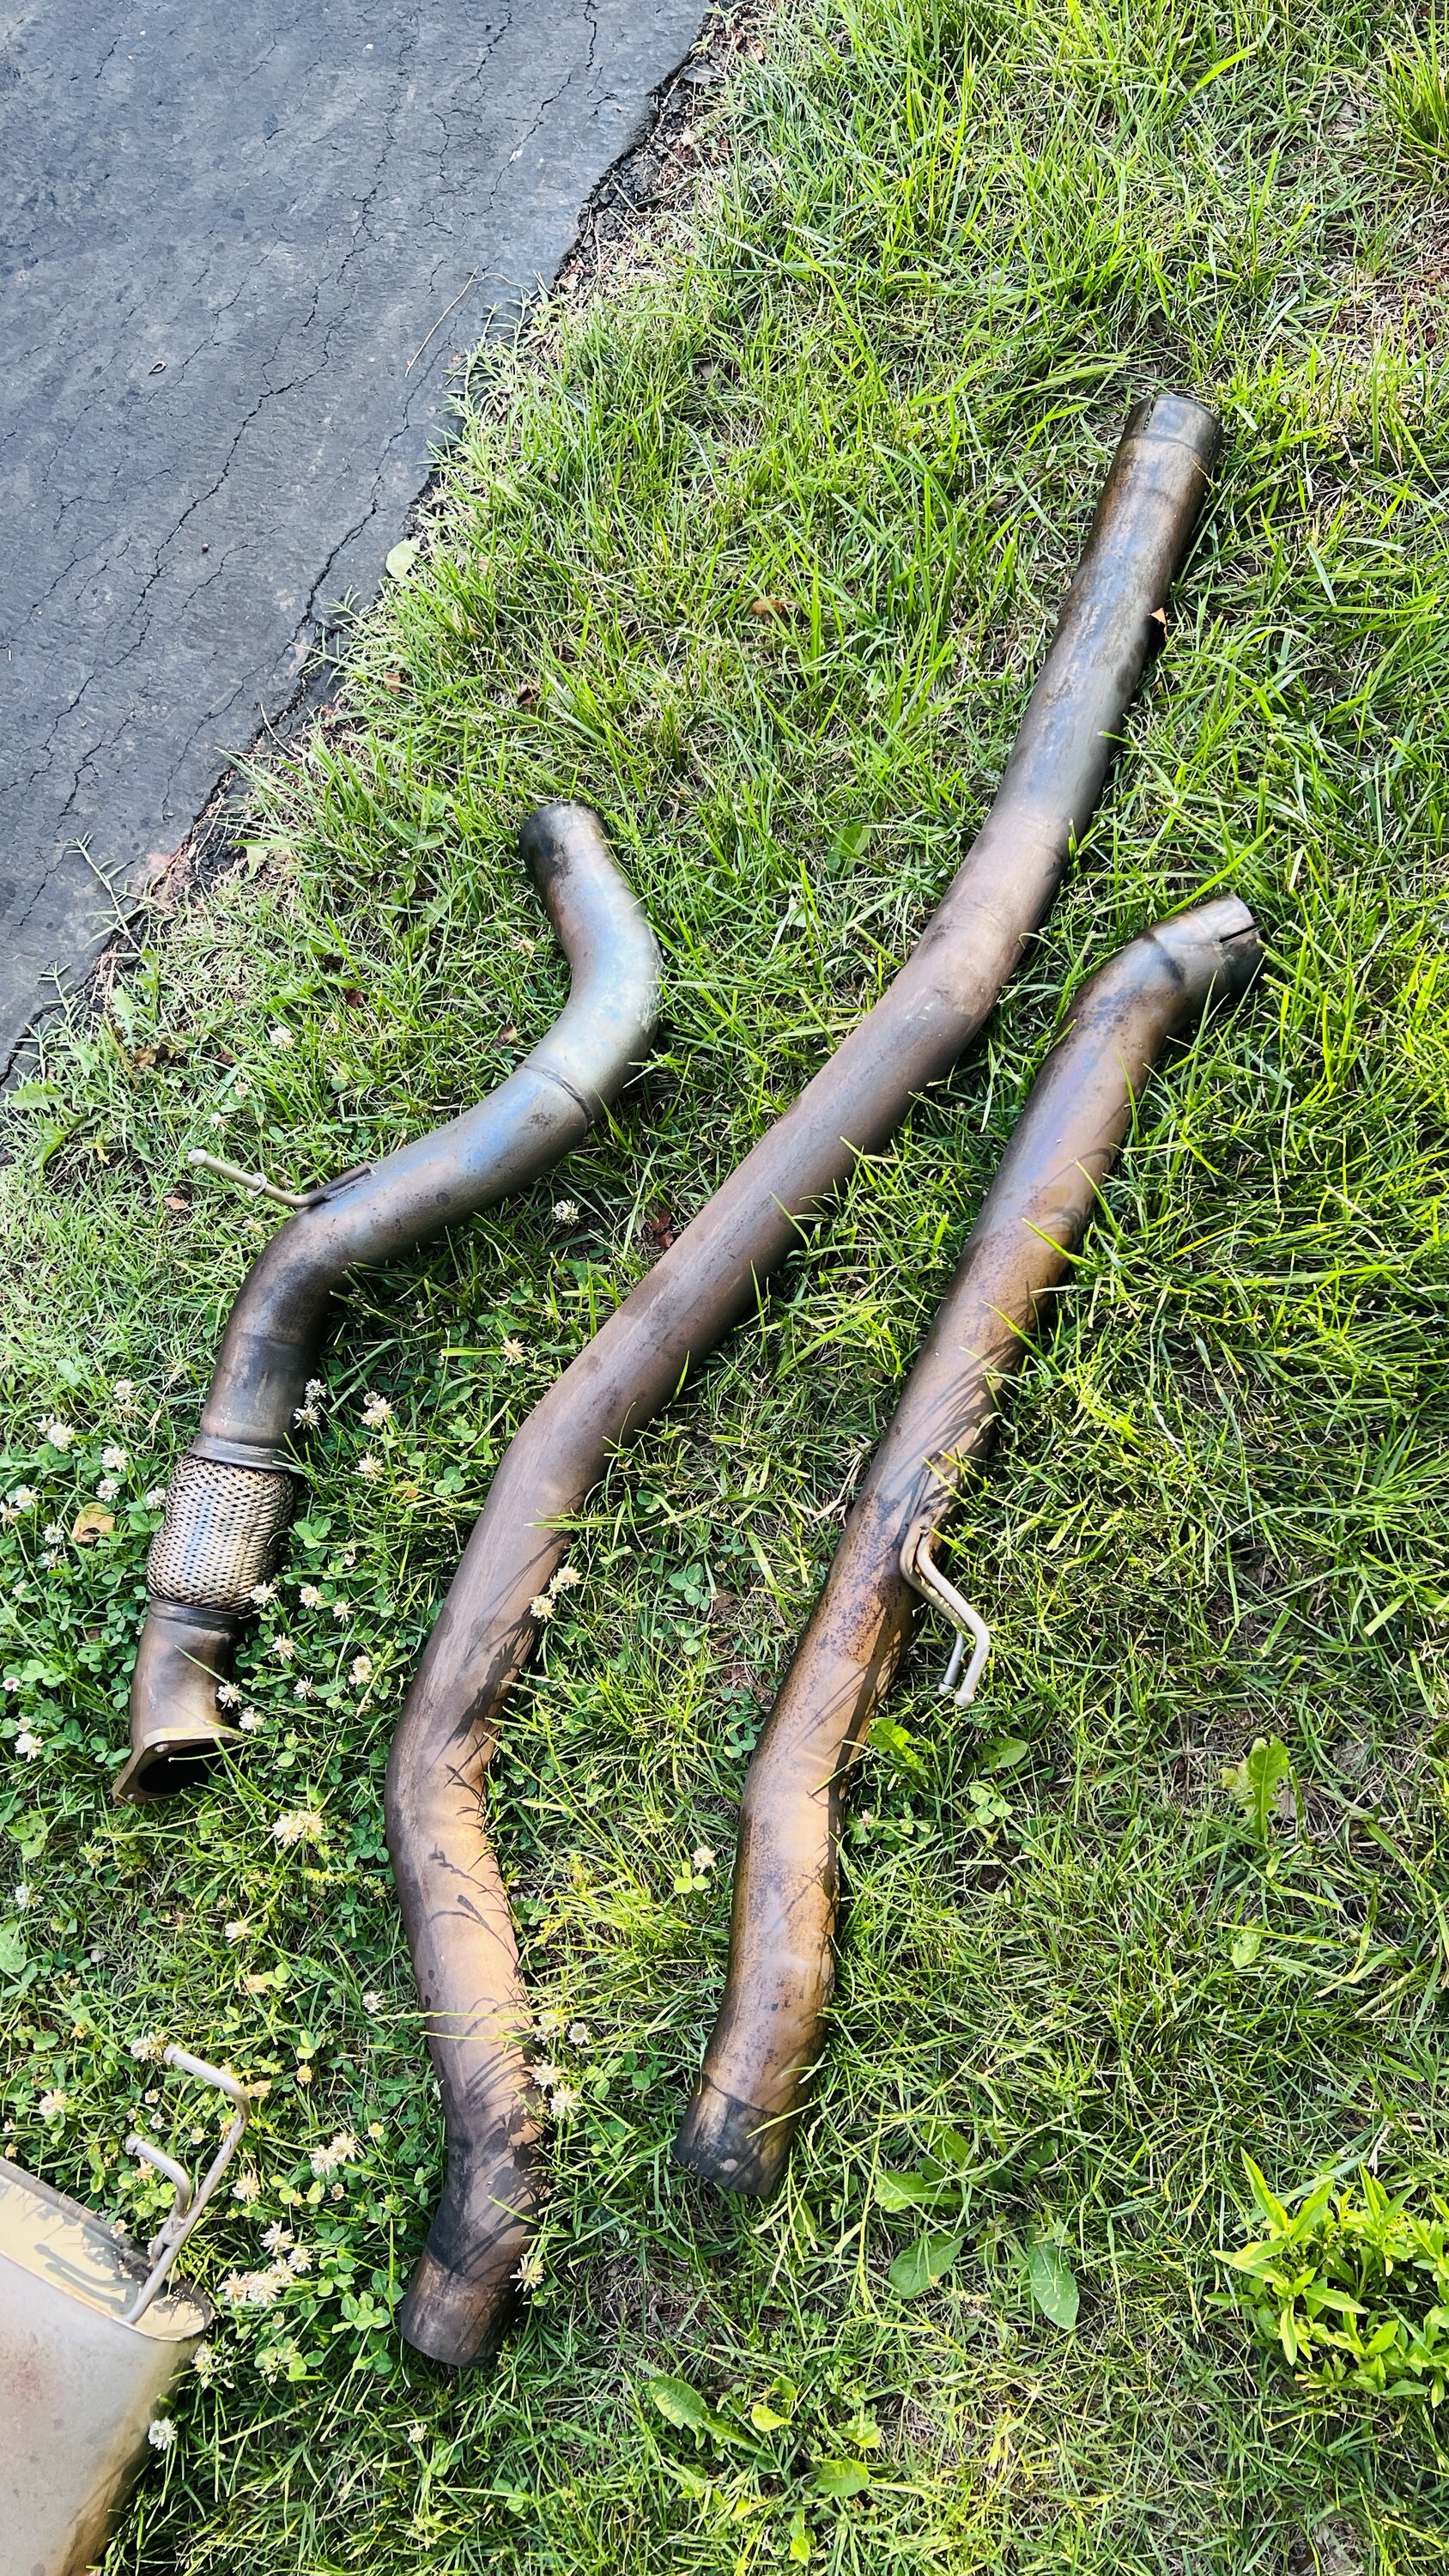 Honda Civic 10th gen Remus exhaust with FP - $1,500 IMG_2658